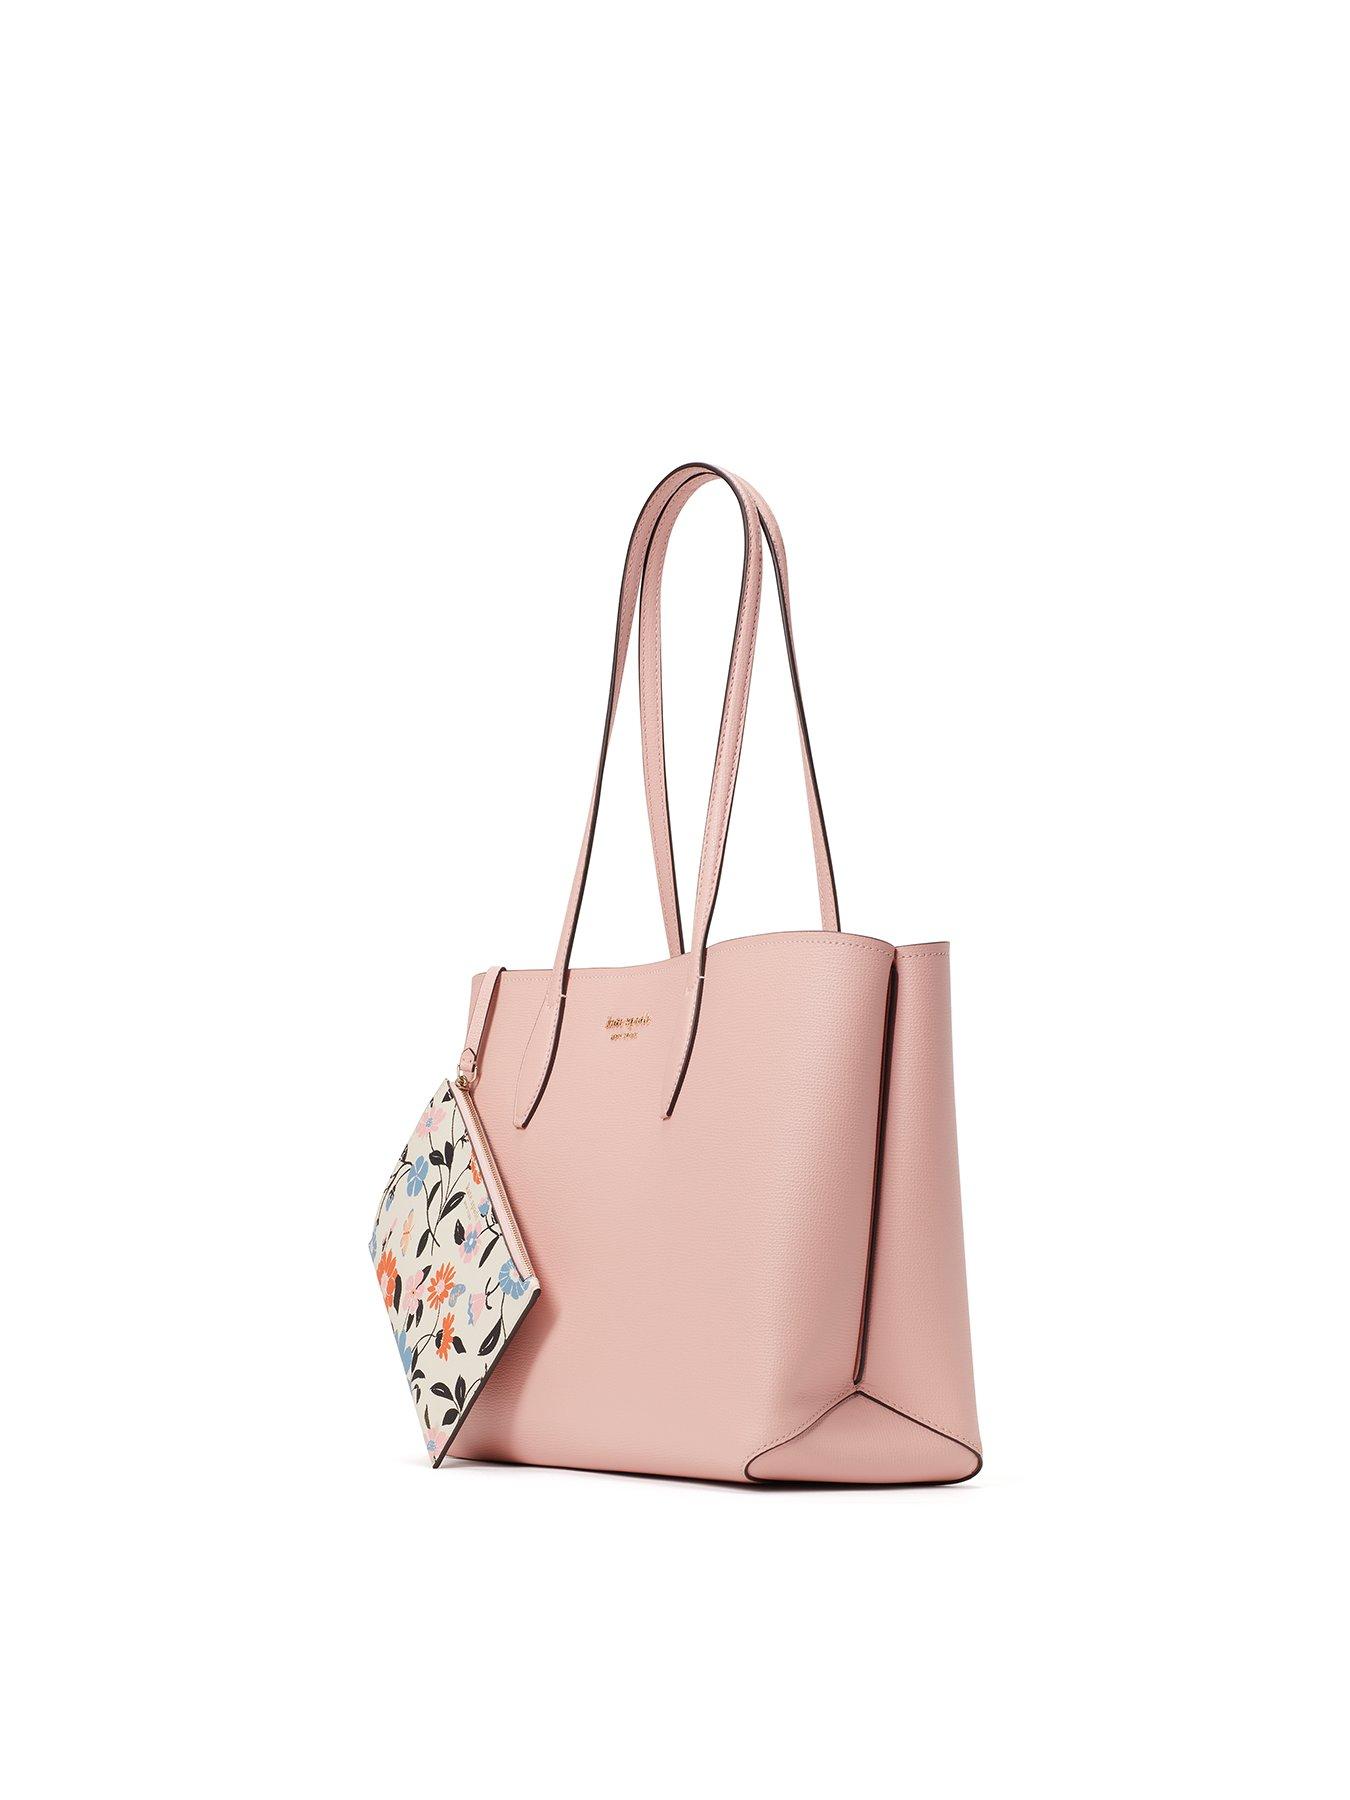 Kate Spade New York All Day Large Tote with Floral Printed Pouch - Pink |  